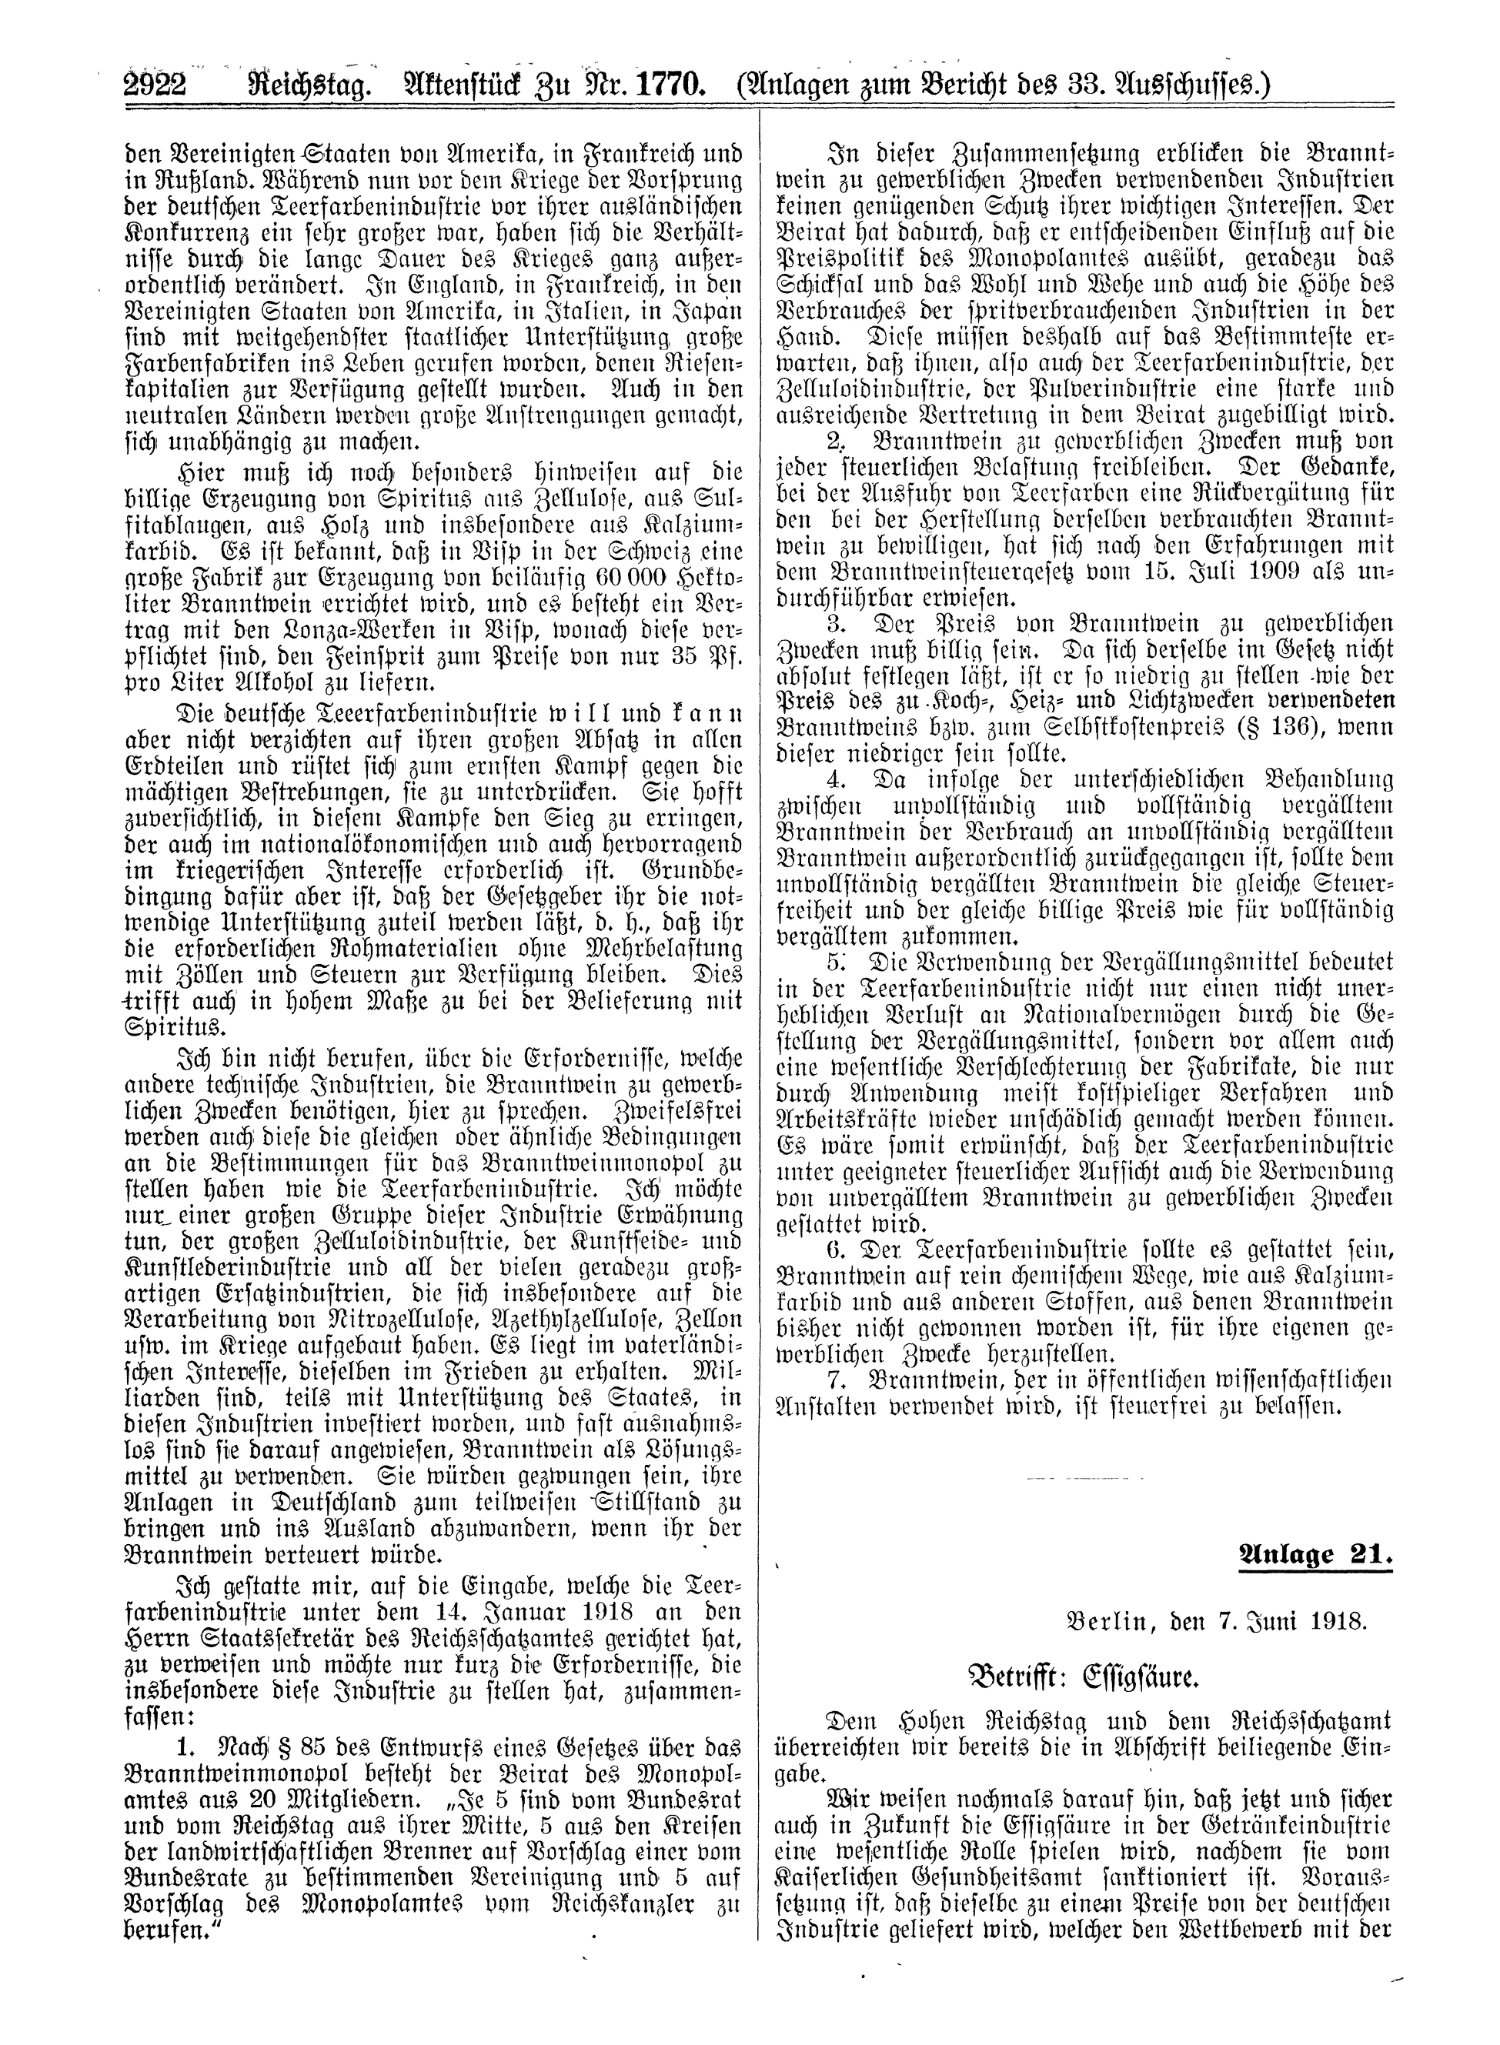 Scan of page 2922